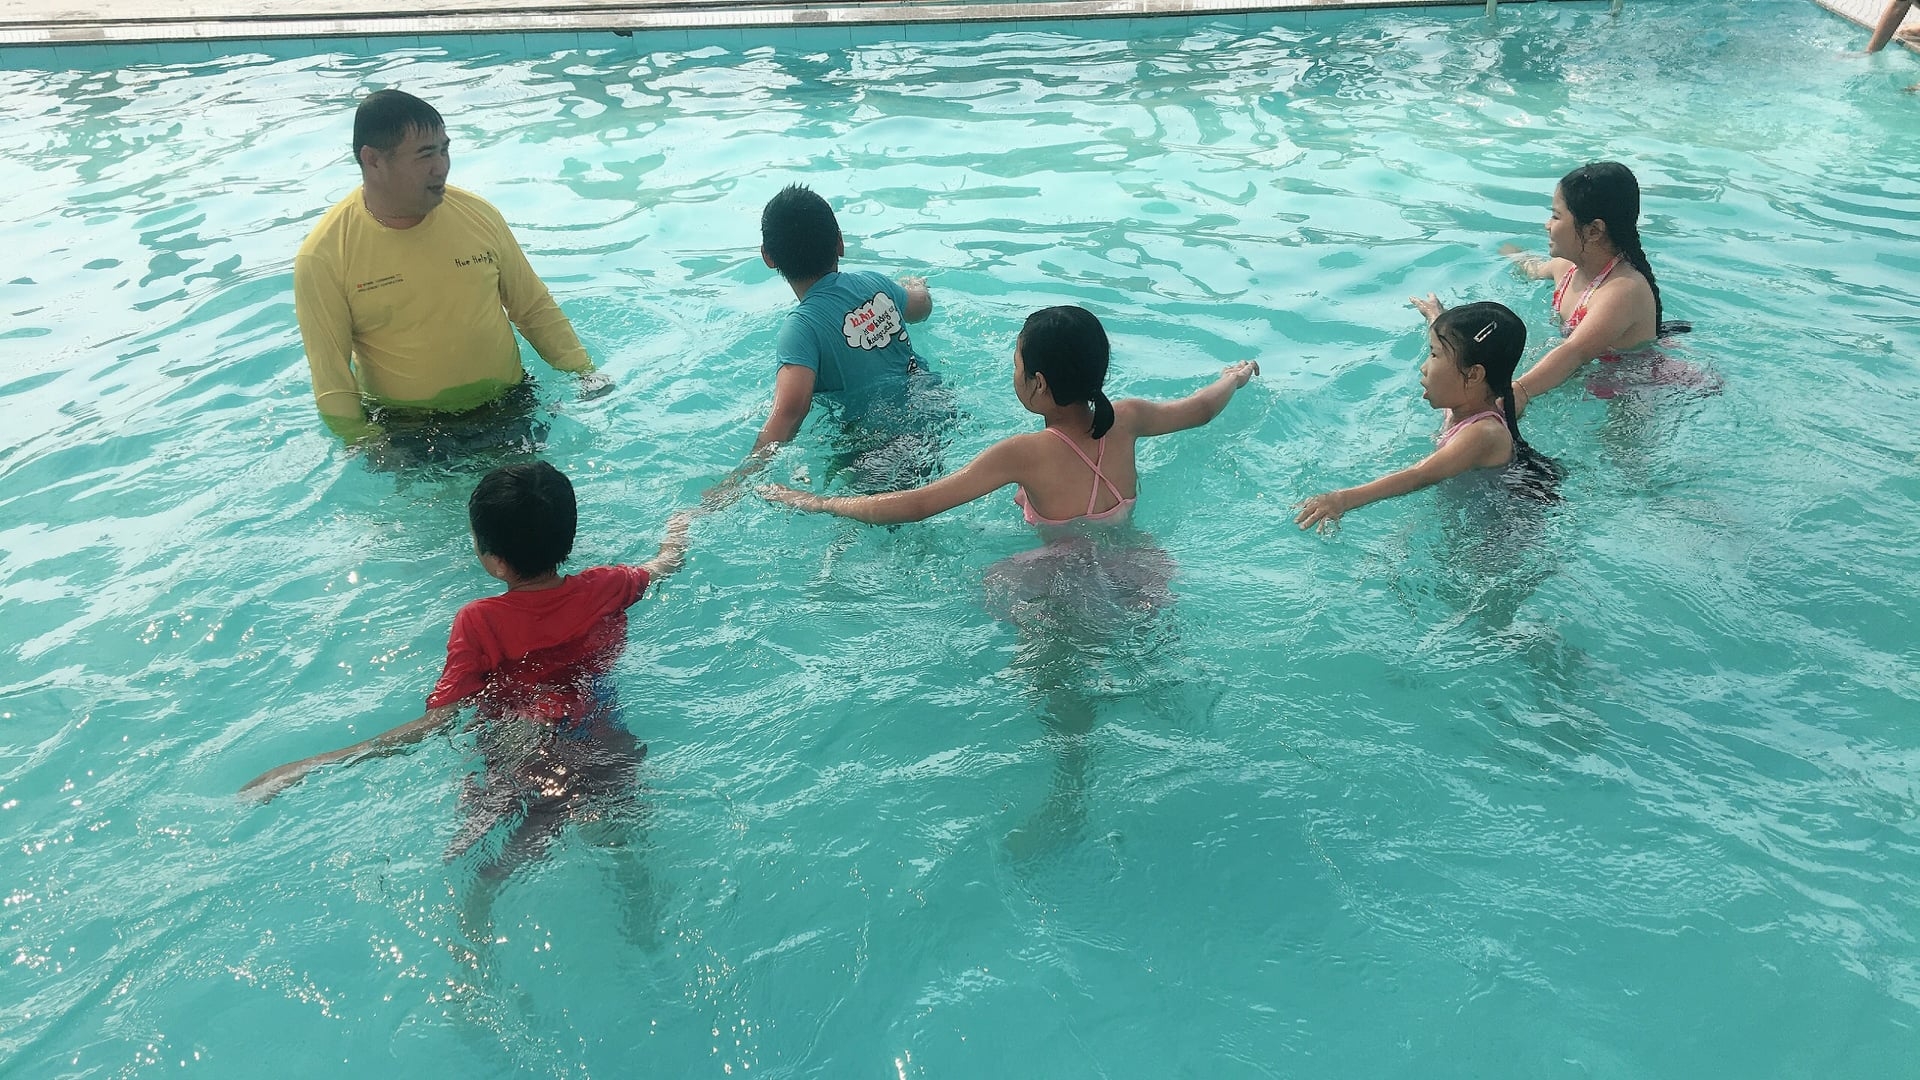 Hue Help Continues "Swimming for Safety" Project